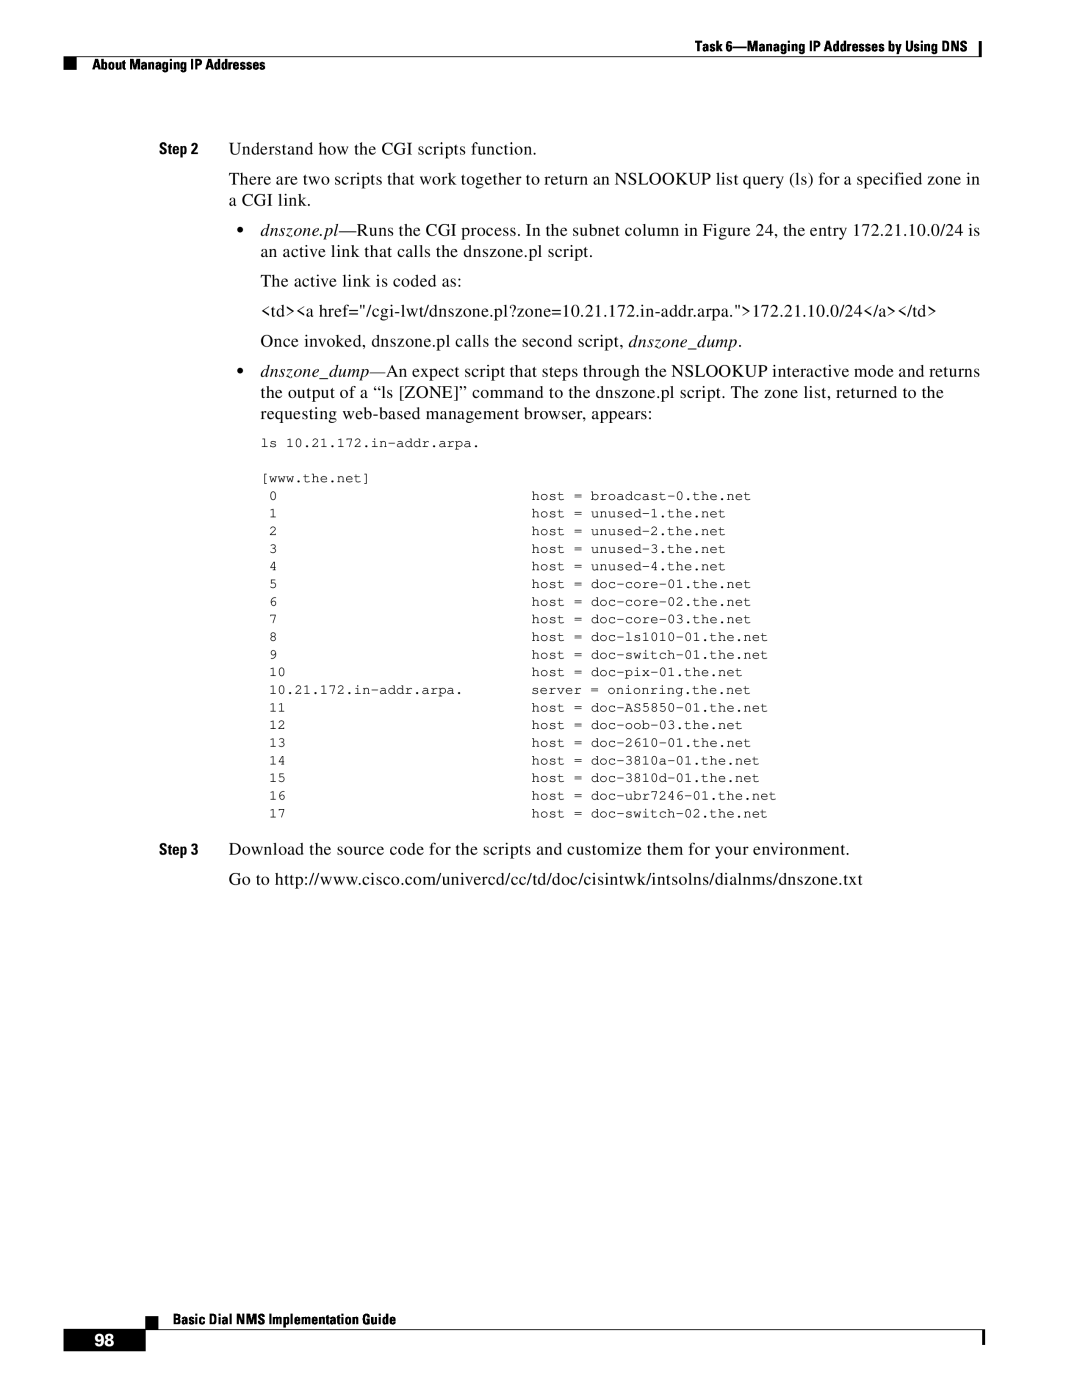 Cisco Systems Dial NMS manual Understand how the CGI scripts function 